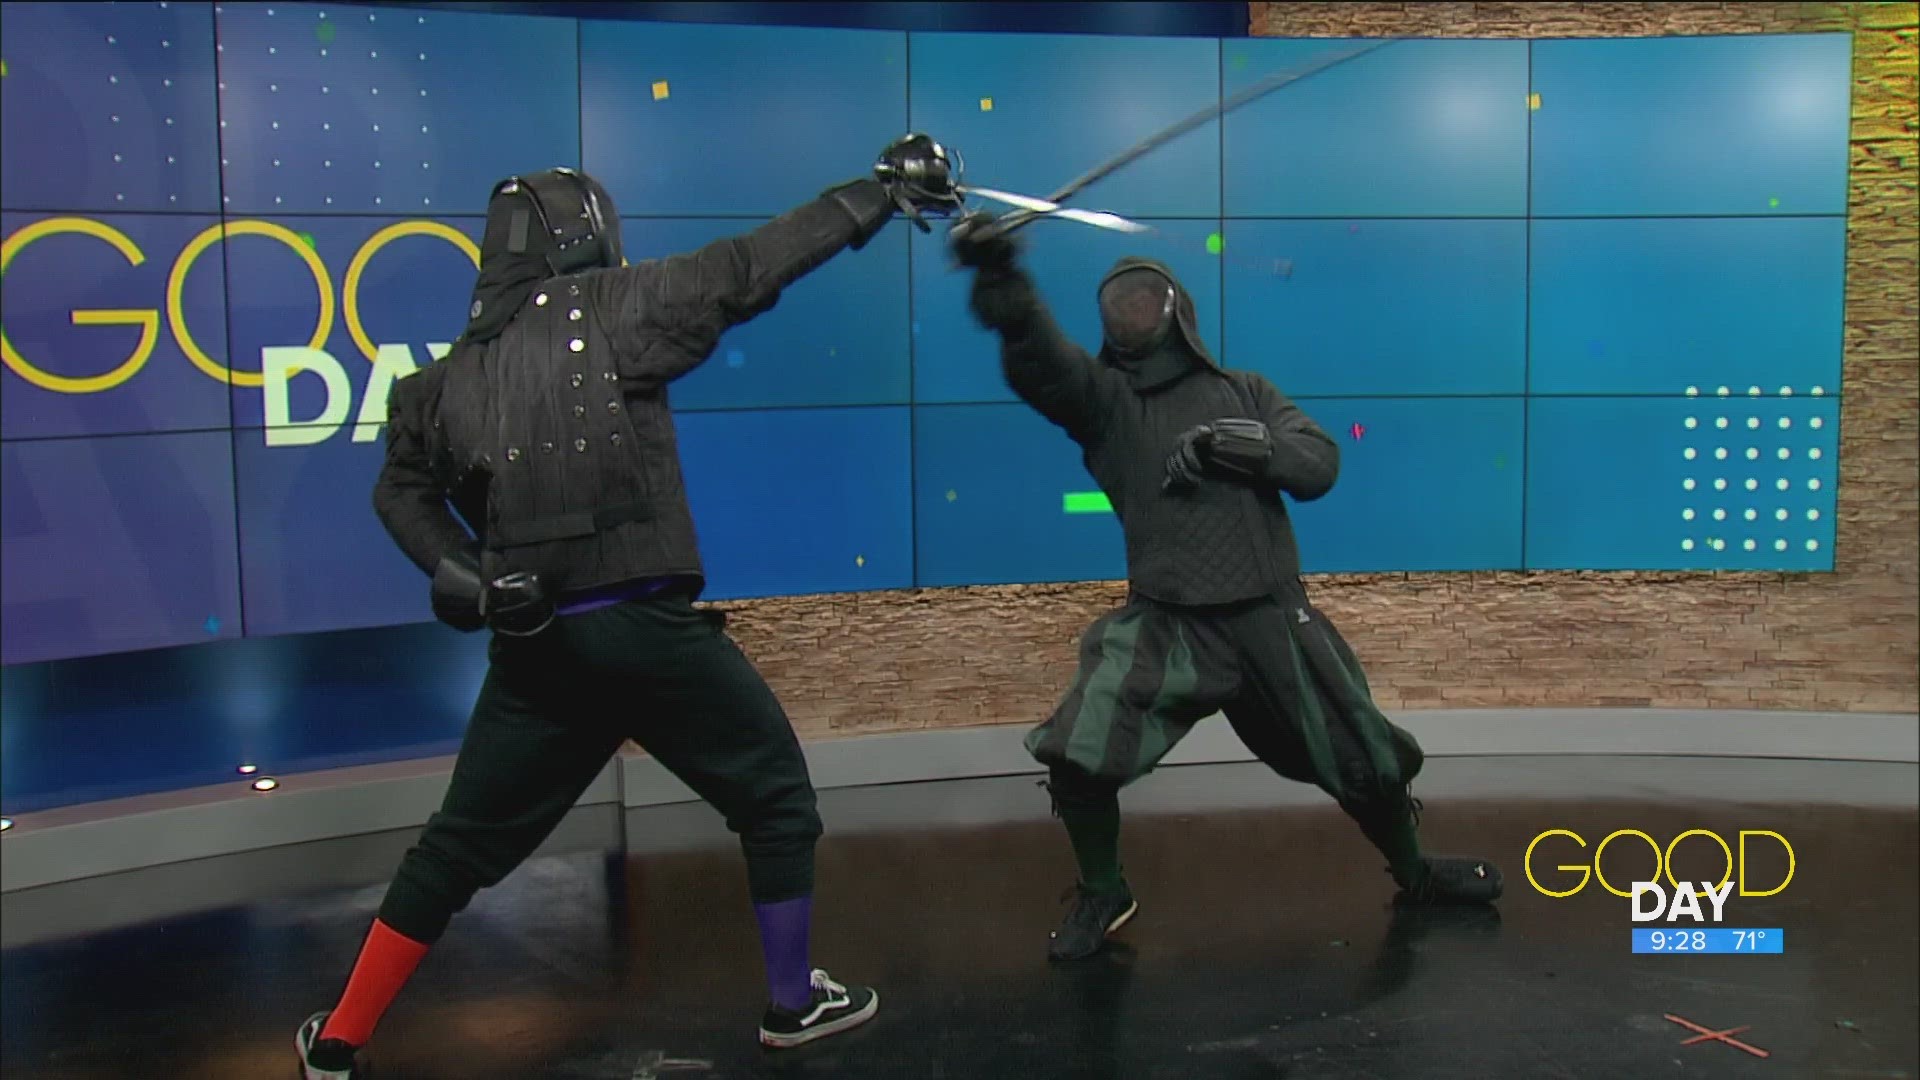 Swords, movies and more How to catch a flick and watch fencing Good Day on WTOL 11 wtol